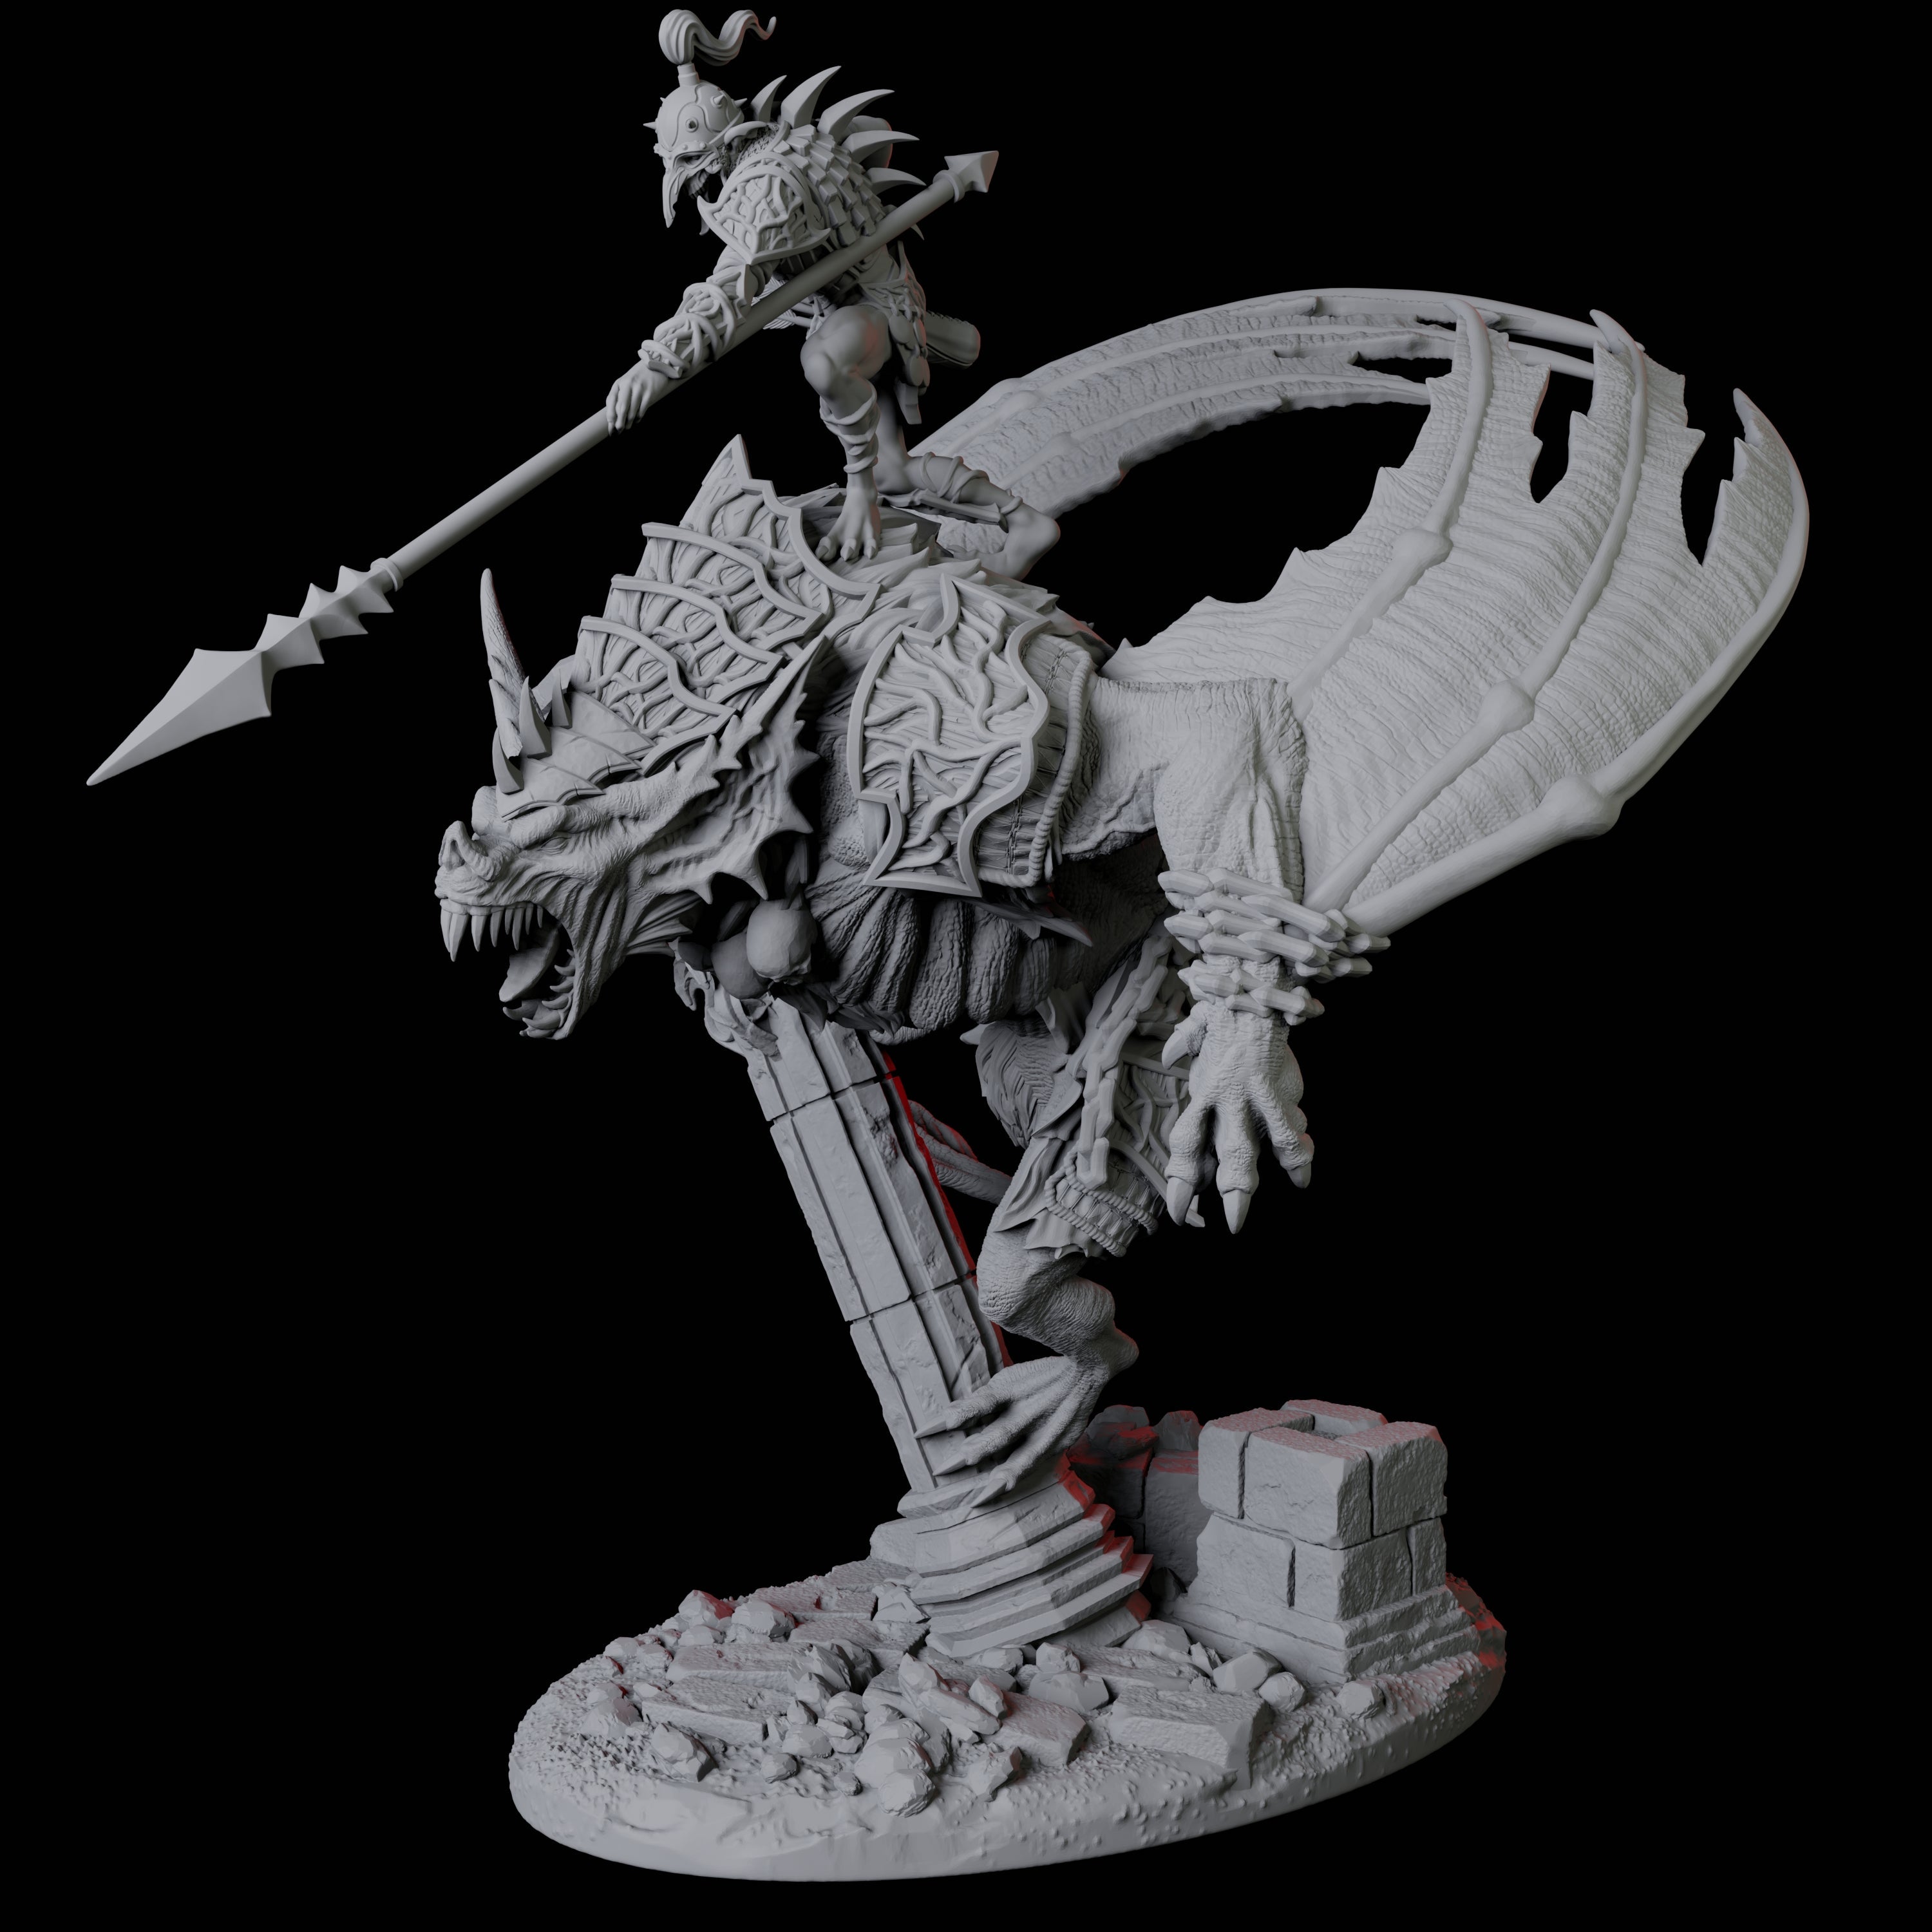 Swooping Vampire Spawn on Giant Bat C Miniature for Dungeons and Dragons, Pathfinder or other TTRPGs